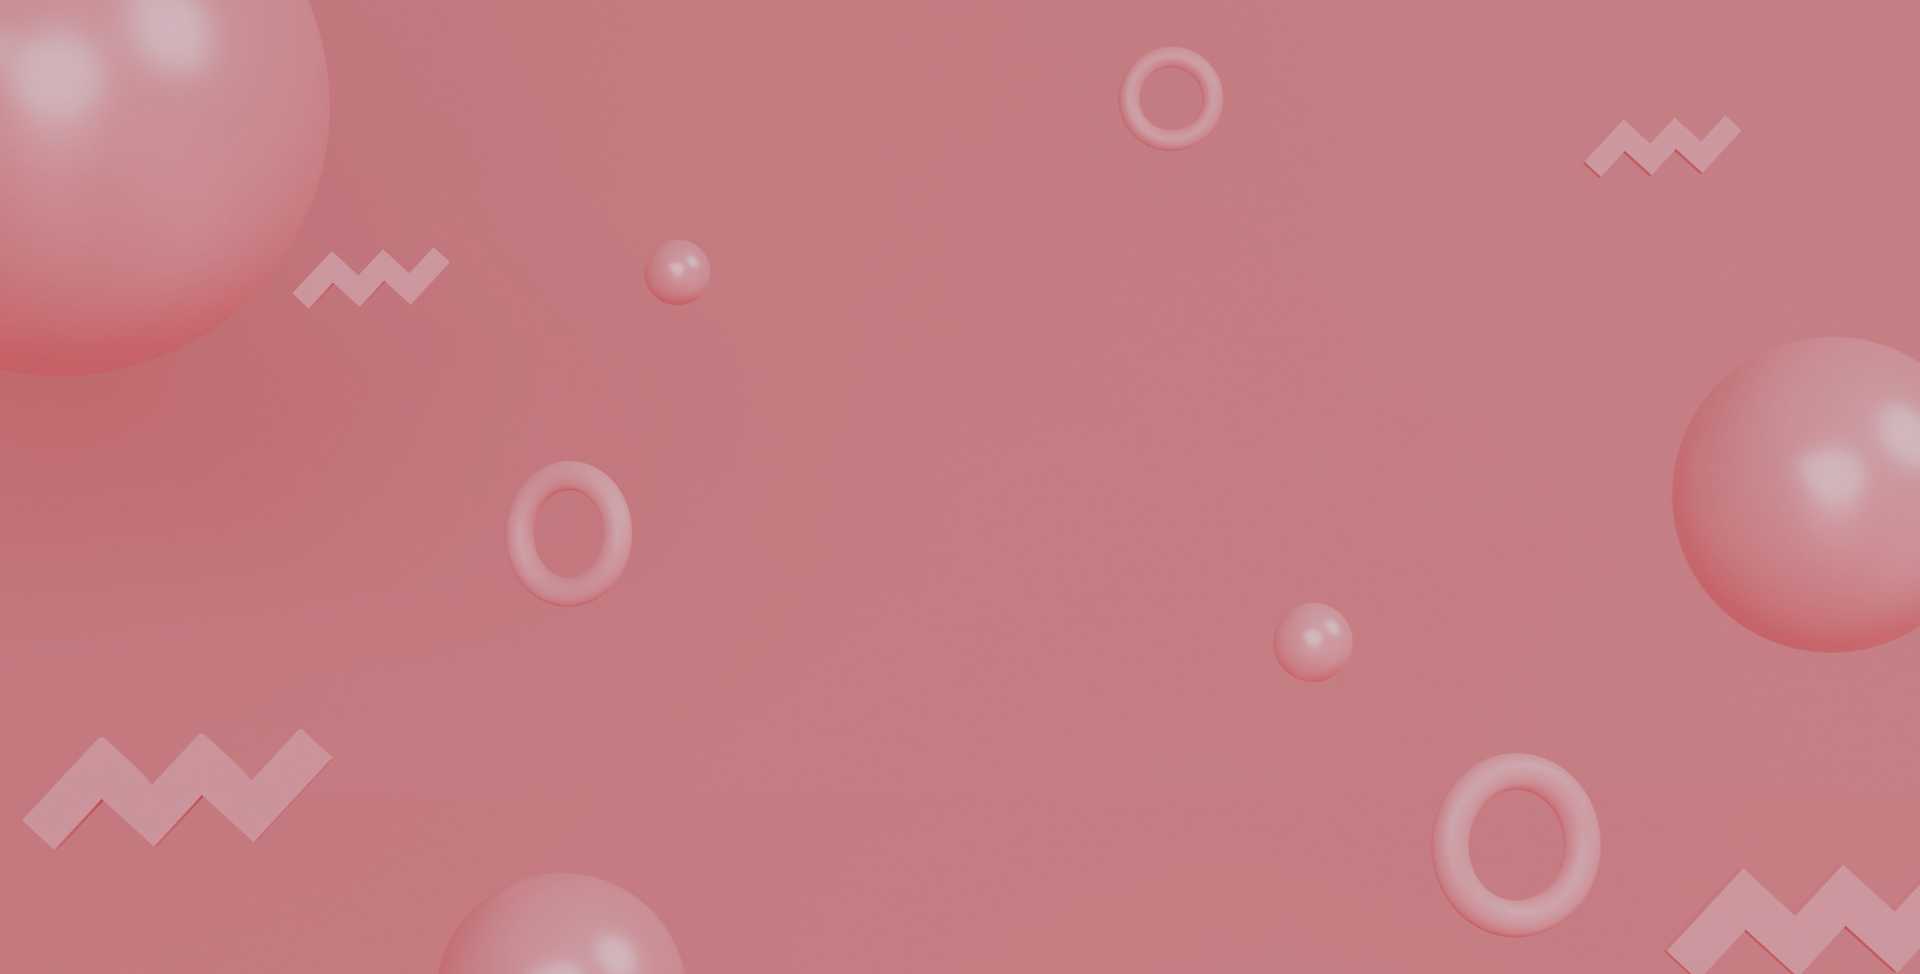 Abstract rendering of pink-colored shapes scattered against a pink backdrop, representing distractions